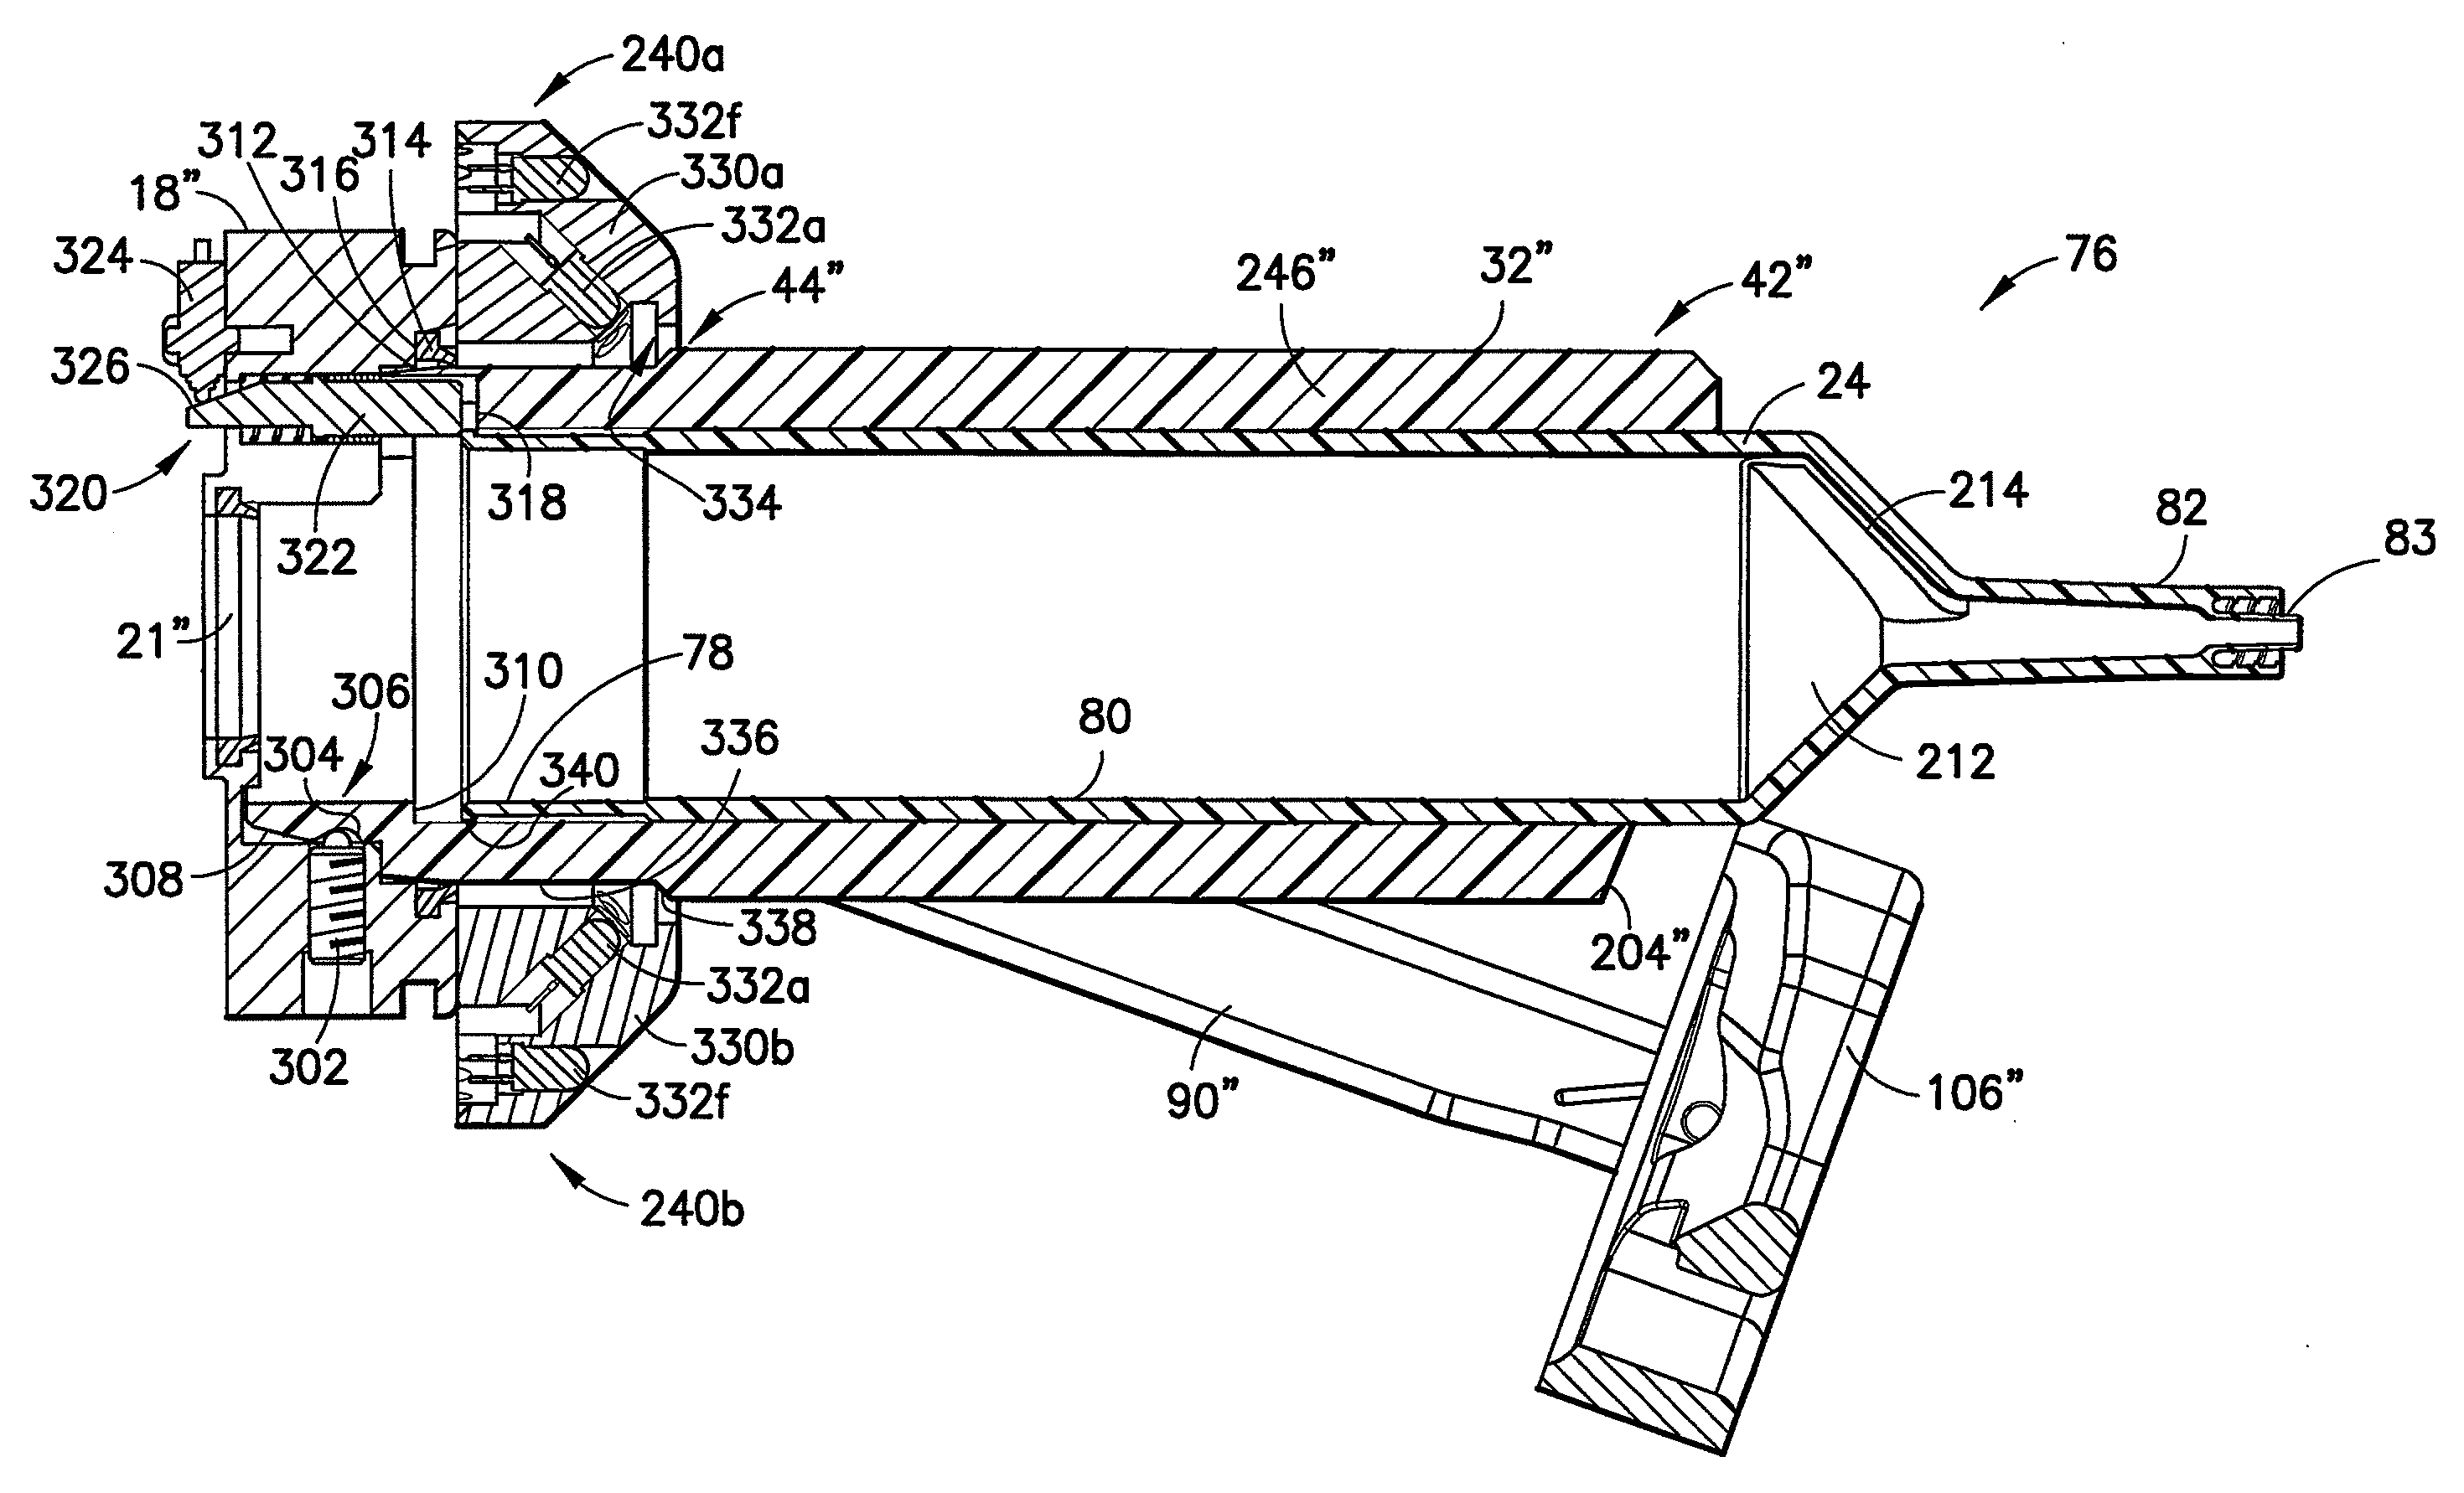 Fluid injection apparatus having Anti-rotation elements to limit syringe plunger rotation